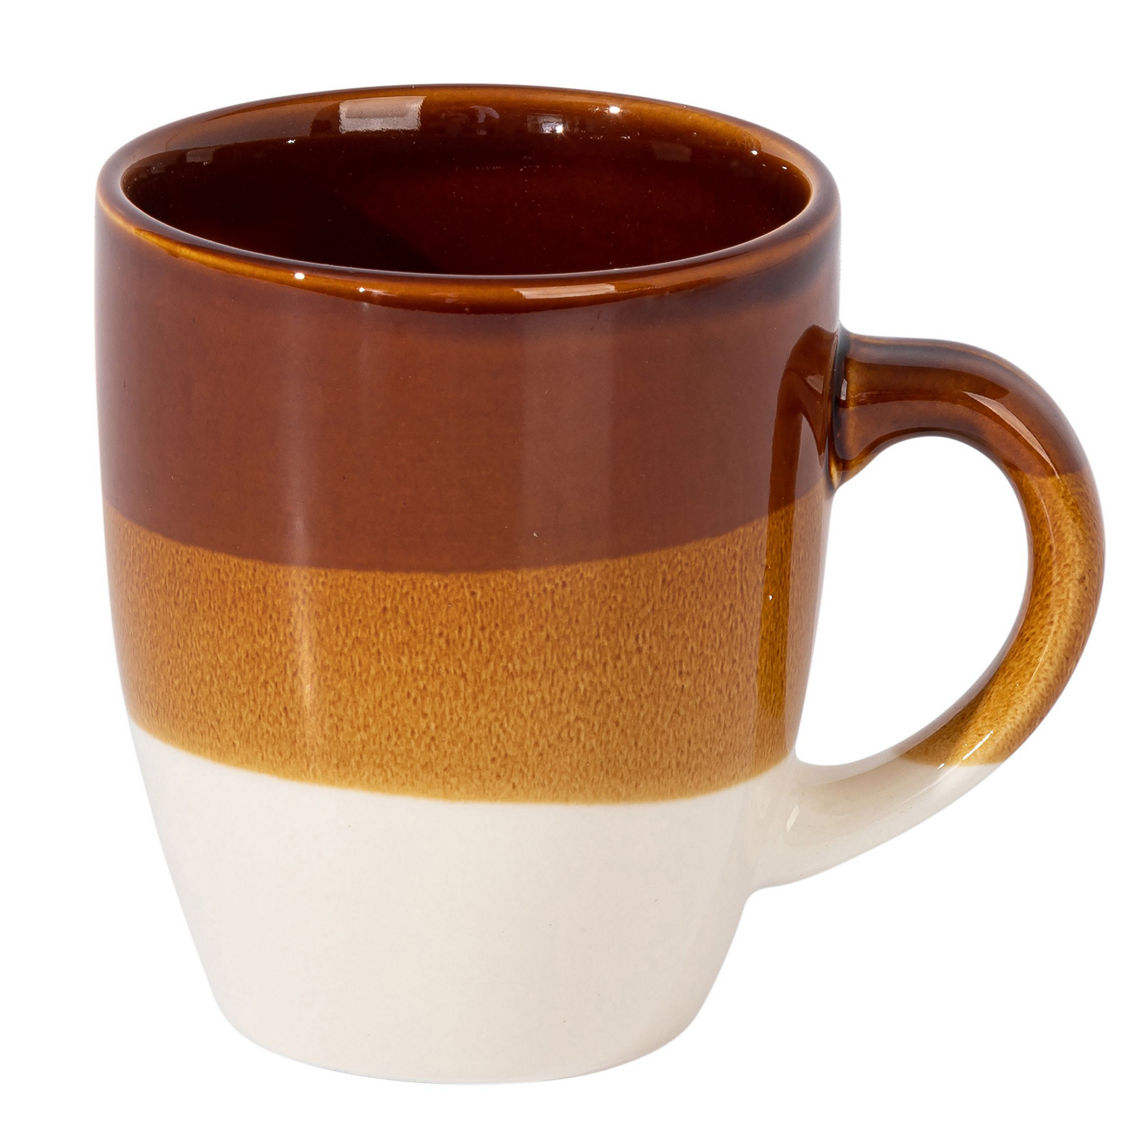 Gibson Home Yellowstone 6 Piece 12 Ounce Stoneware Mug Set in Brown and White - Image 3 of 5